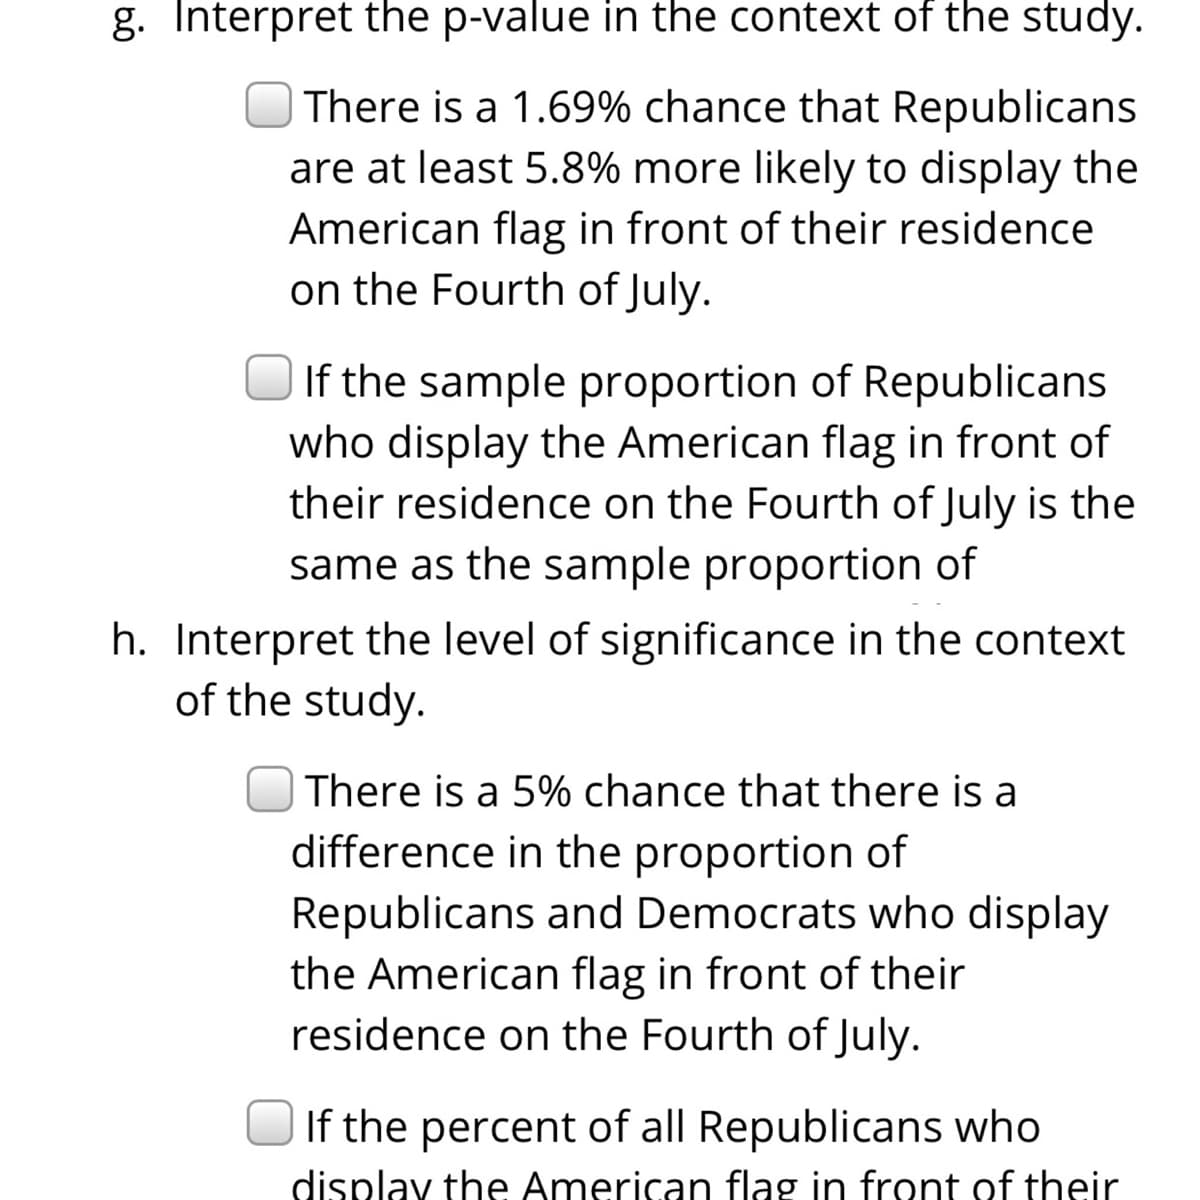 g. Interpret the p-value in the context of the study.
There is a 1.69% chance that Republicans
are at least 5.8% more likely to display the
American flag in front of their residence
on the Fourth of July.
If the sample proportion of Republicans
who display the American flag in front of
their residence on the Fourth of July is the
same as the sample proportion of
h. Interpret the level of significance in the context
of the study.
| There is a 5% chance that there is a
difference in the proportion of
Republicans and Democrats who display
the American flag in front of their
residence on the Fourth of July.
If the percent of all Republicans who
display the American flag in front of their
